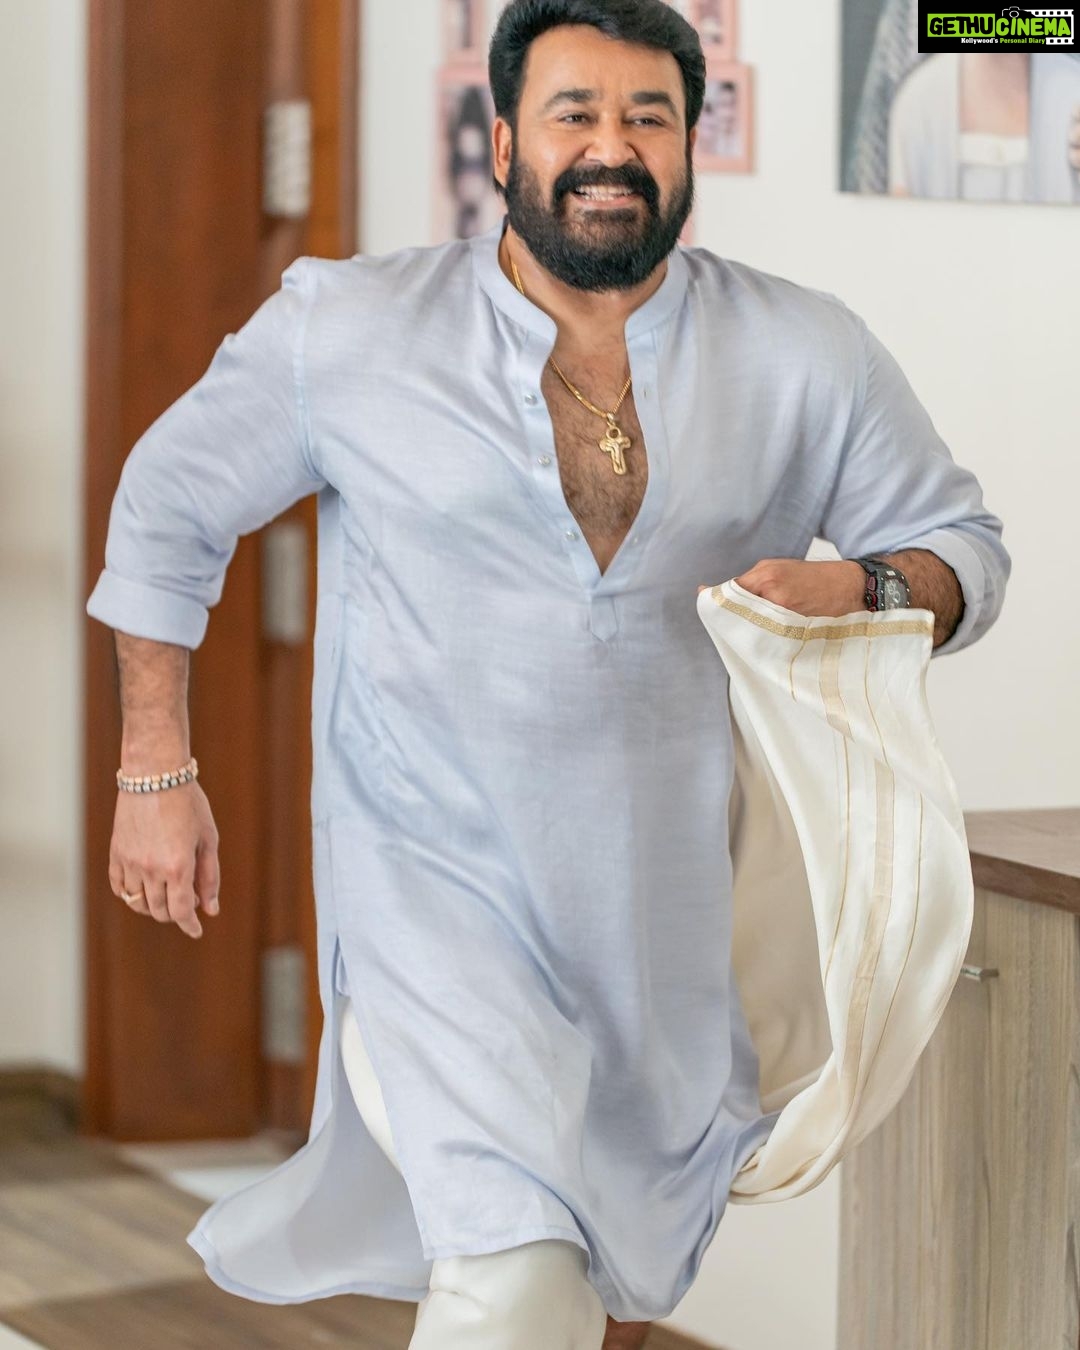 Actor Mohanlal HD Photos and Wallpapers February 2022 - Gethu Cinema